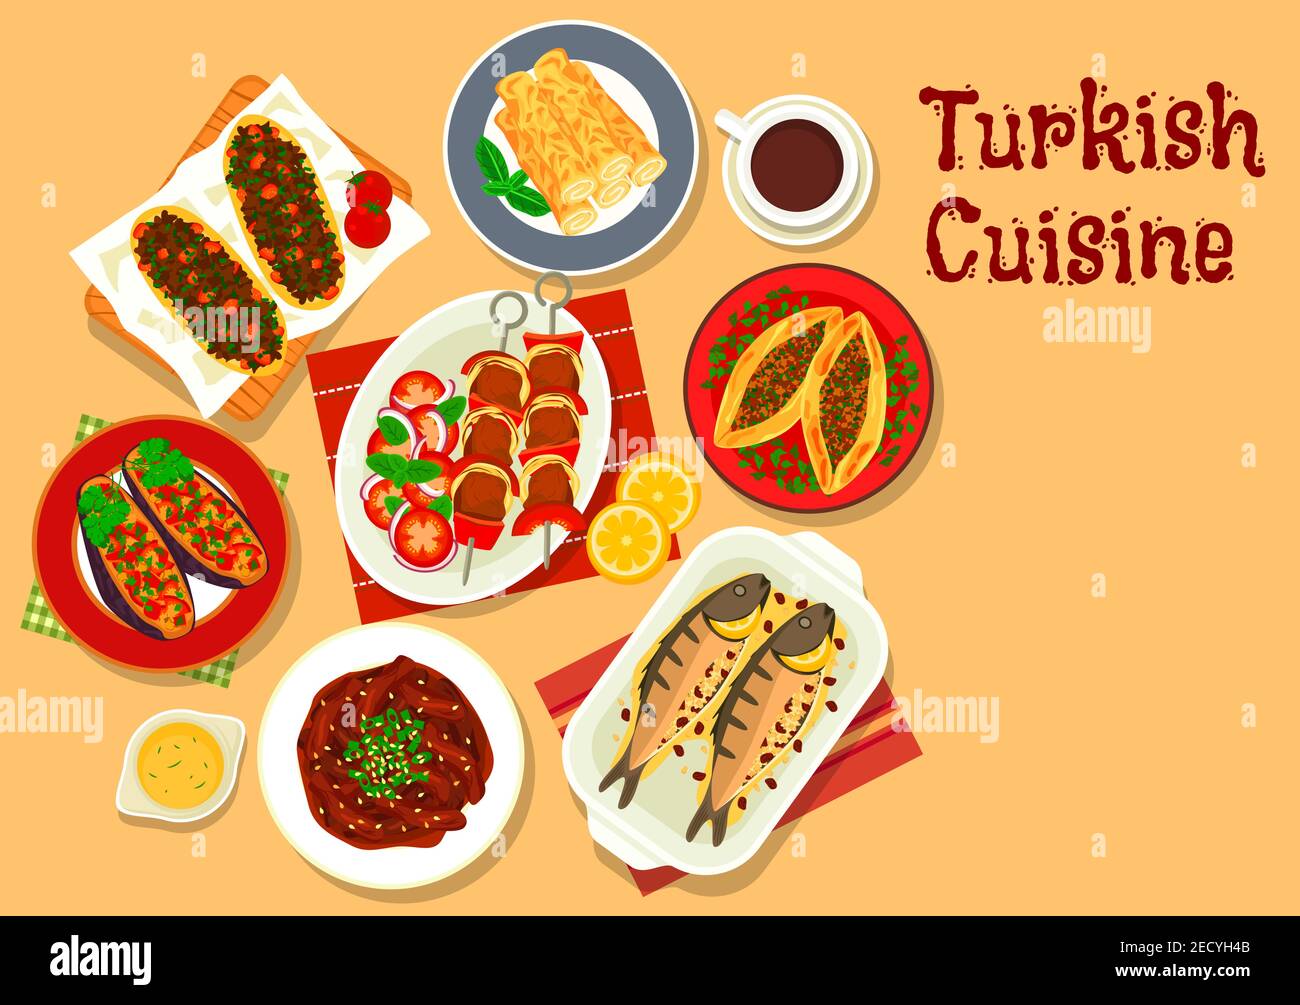 Turkish cuisine shish kebab skewer icon with stuffed eggplant, meat pie pide, pastry with cheese, beef stew, stuffed mackerel, lamb pie and coffee Stock Vector